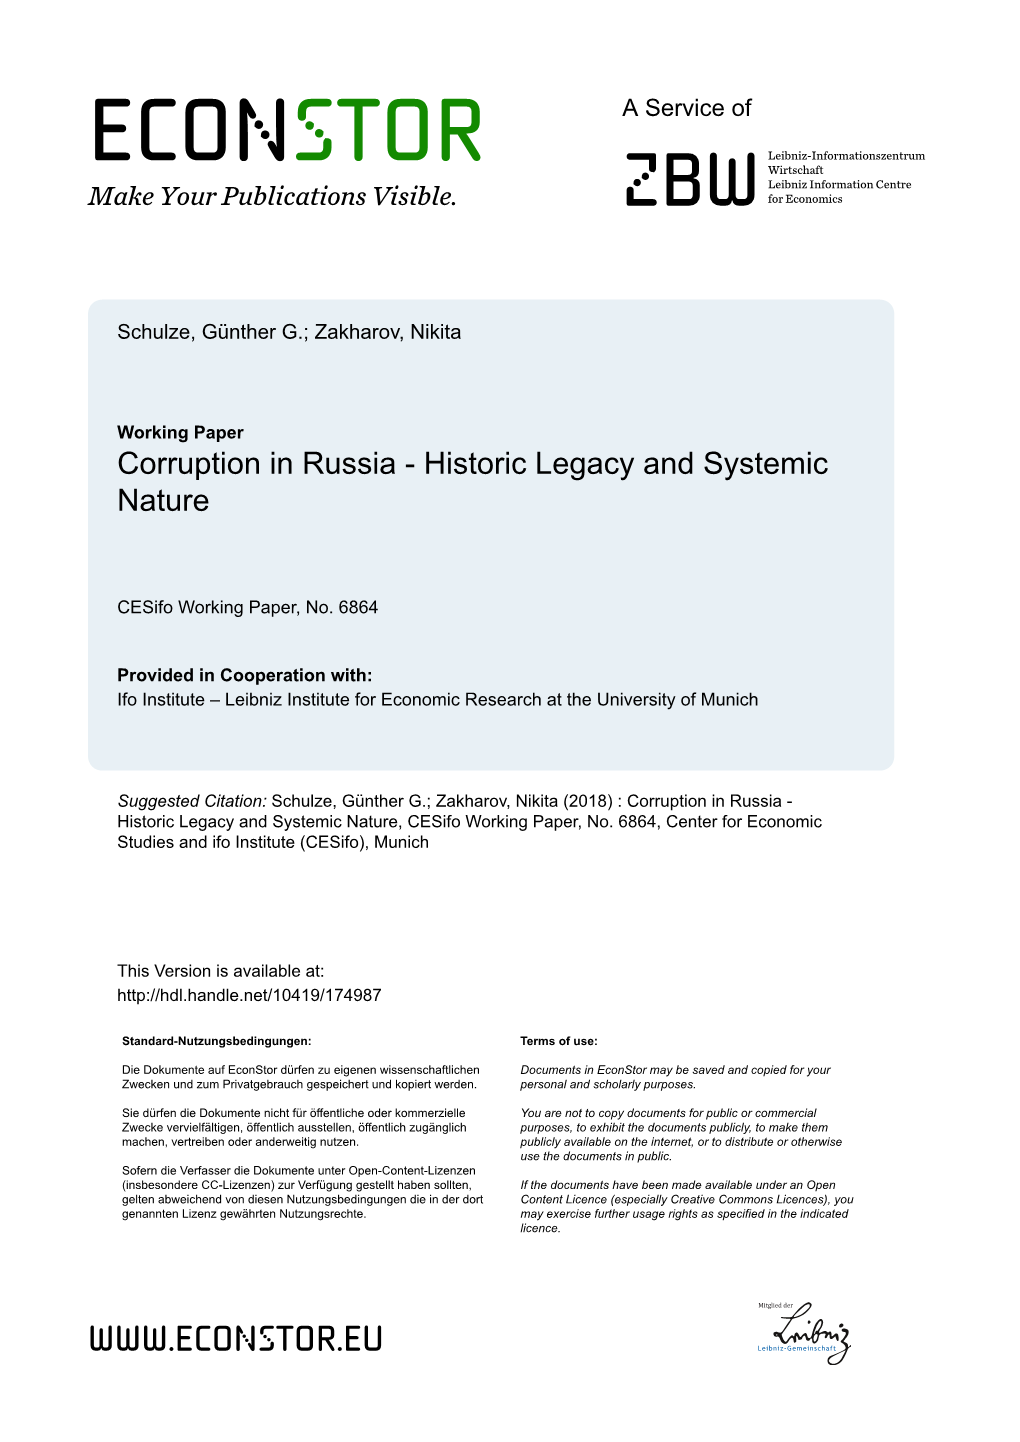 Corruption in Russia - Historic Legacy and Systemic Nature